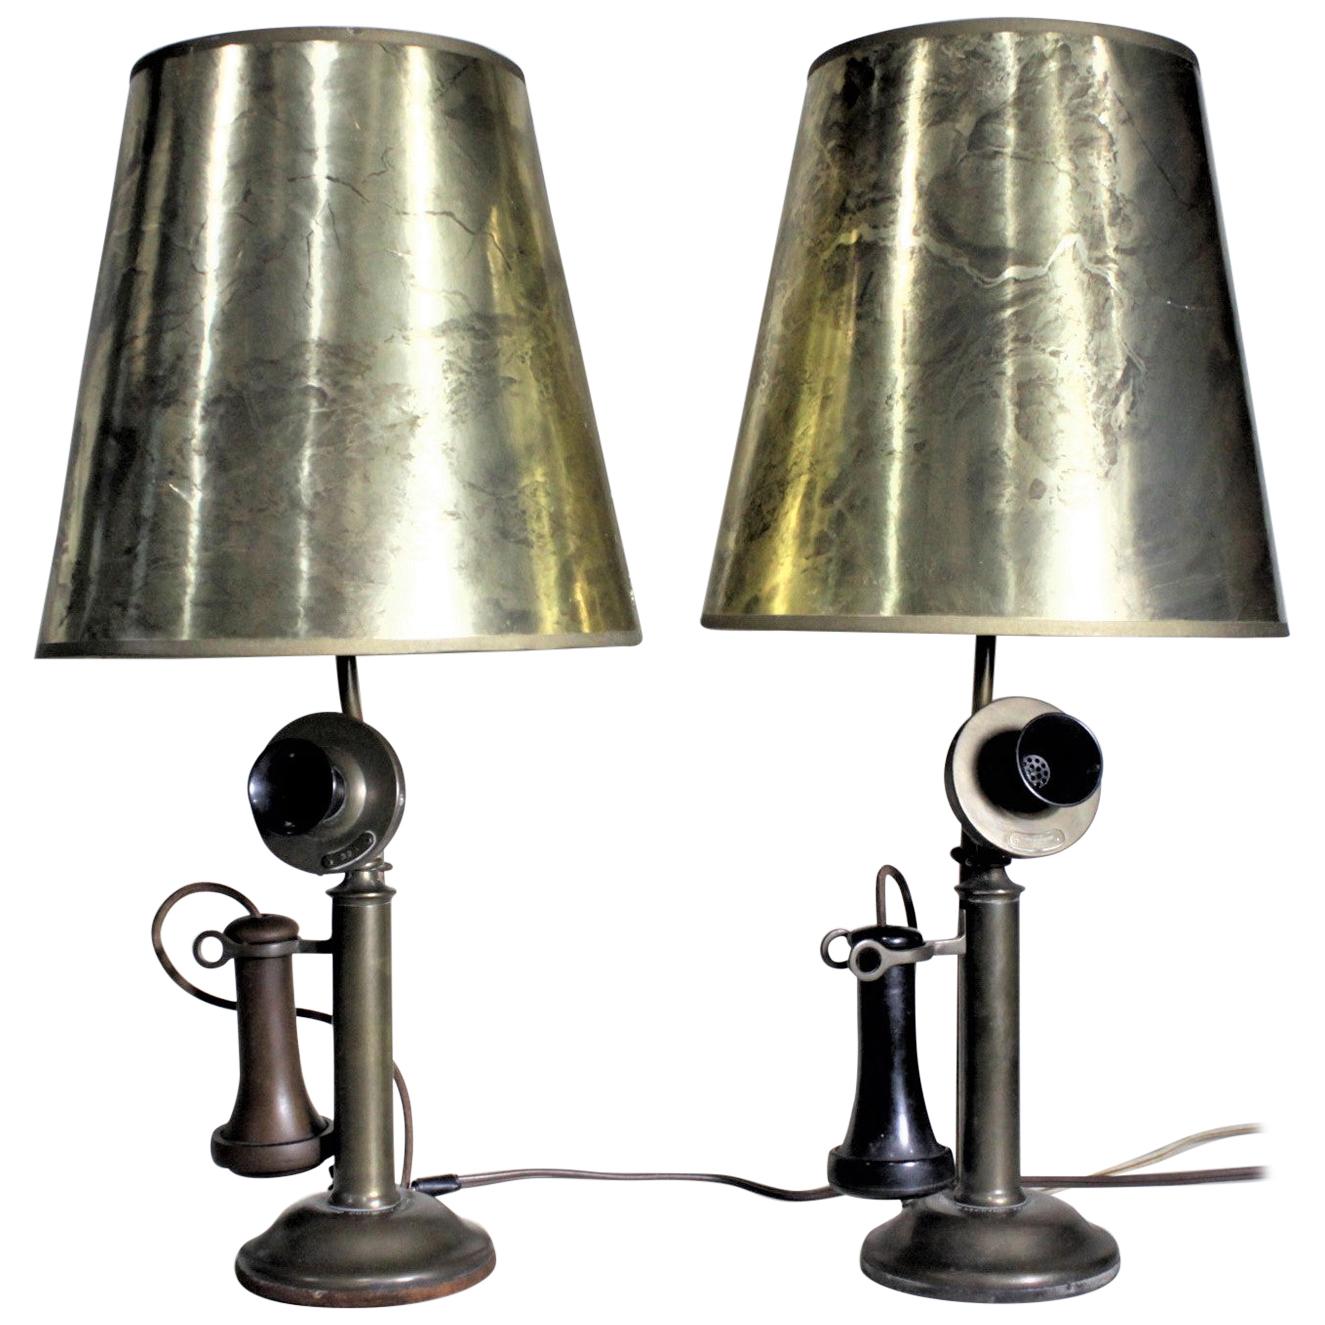 Pair of Antique Brass Northern Electric Candlestick Telephone Table Lamps